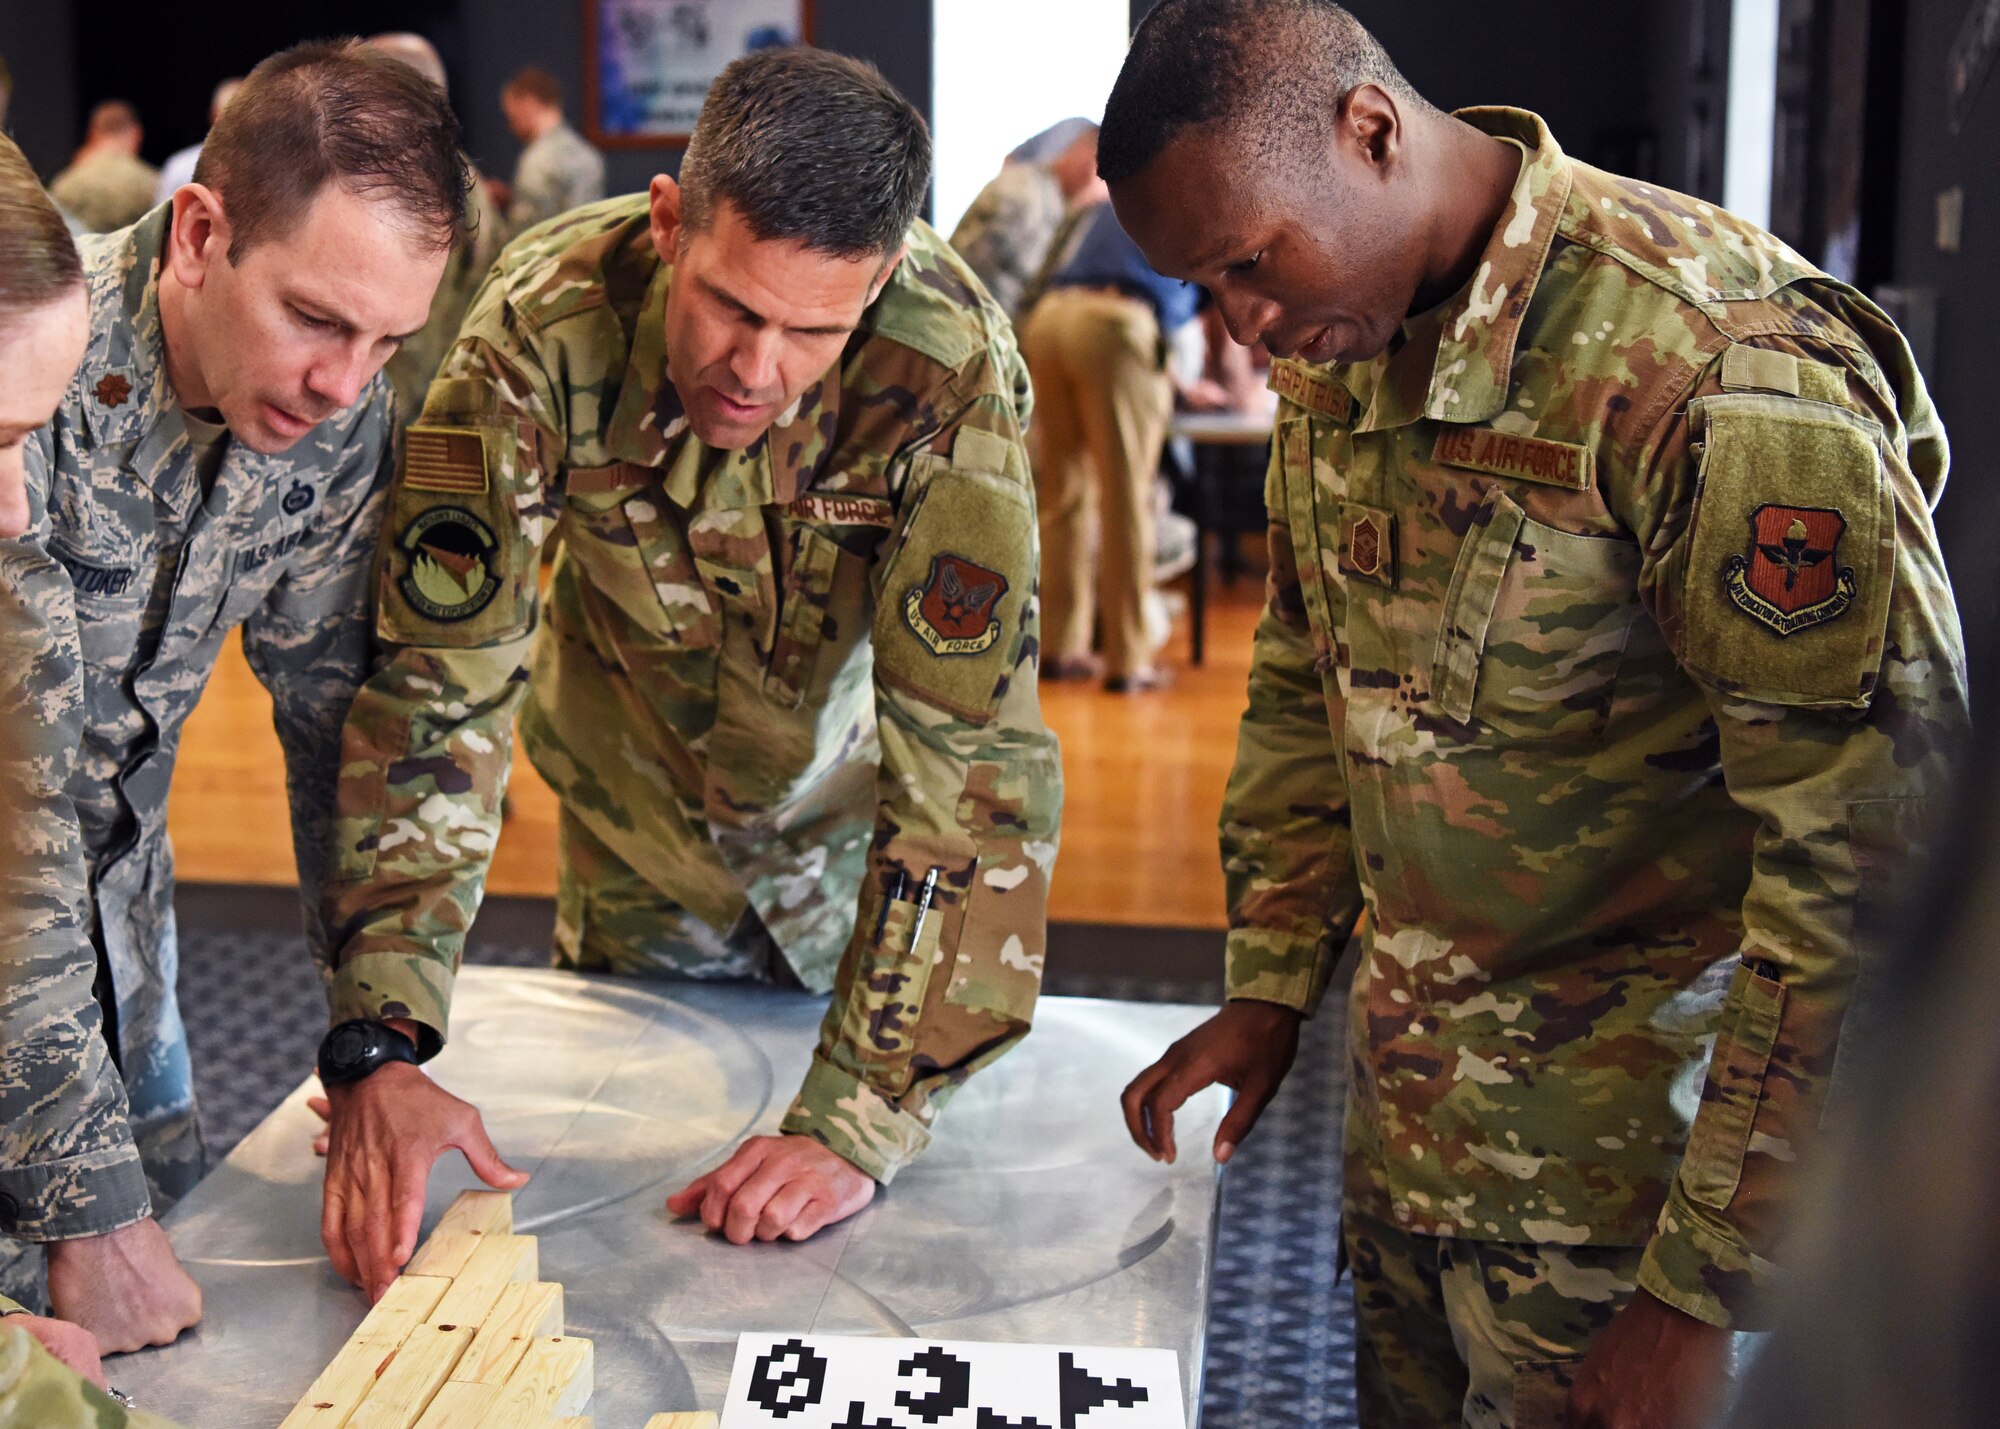 U.S. Air Force Maj. Brandon Stoker and Lt. Col. Tyler Harris from The National Air and Space Intelligence Center, work with Chief Master Sgt. Lavor Kirkpatrick, 17th Training Wing Command Chief, and 17th TRW students to solve puzzles during the mental health fitness challenge at Goodfellow Air Force Base, Texas, August 13, 2019. The challenge included physical and mental exercises to keep individuals both sharp and strong. (U.S. Air Force photo by Airman 1st Class Ethan Sherwood/Released)